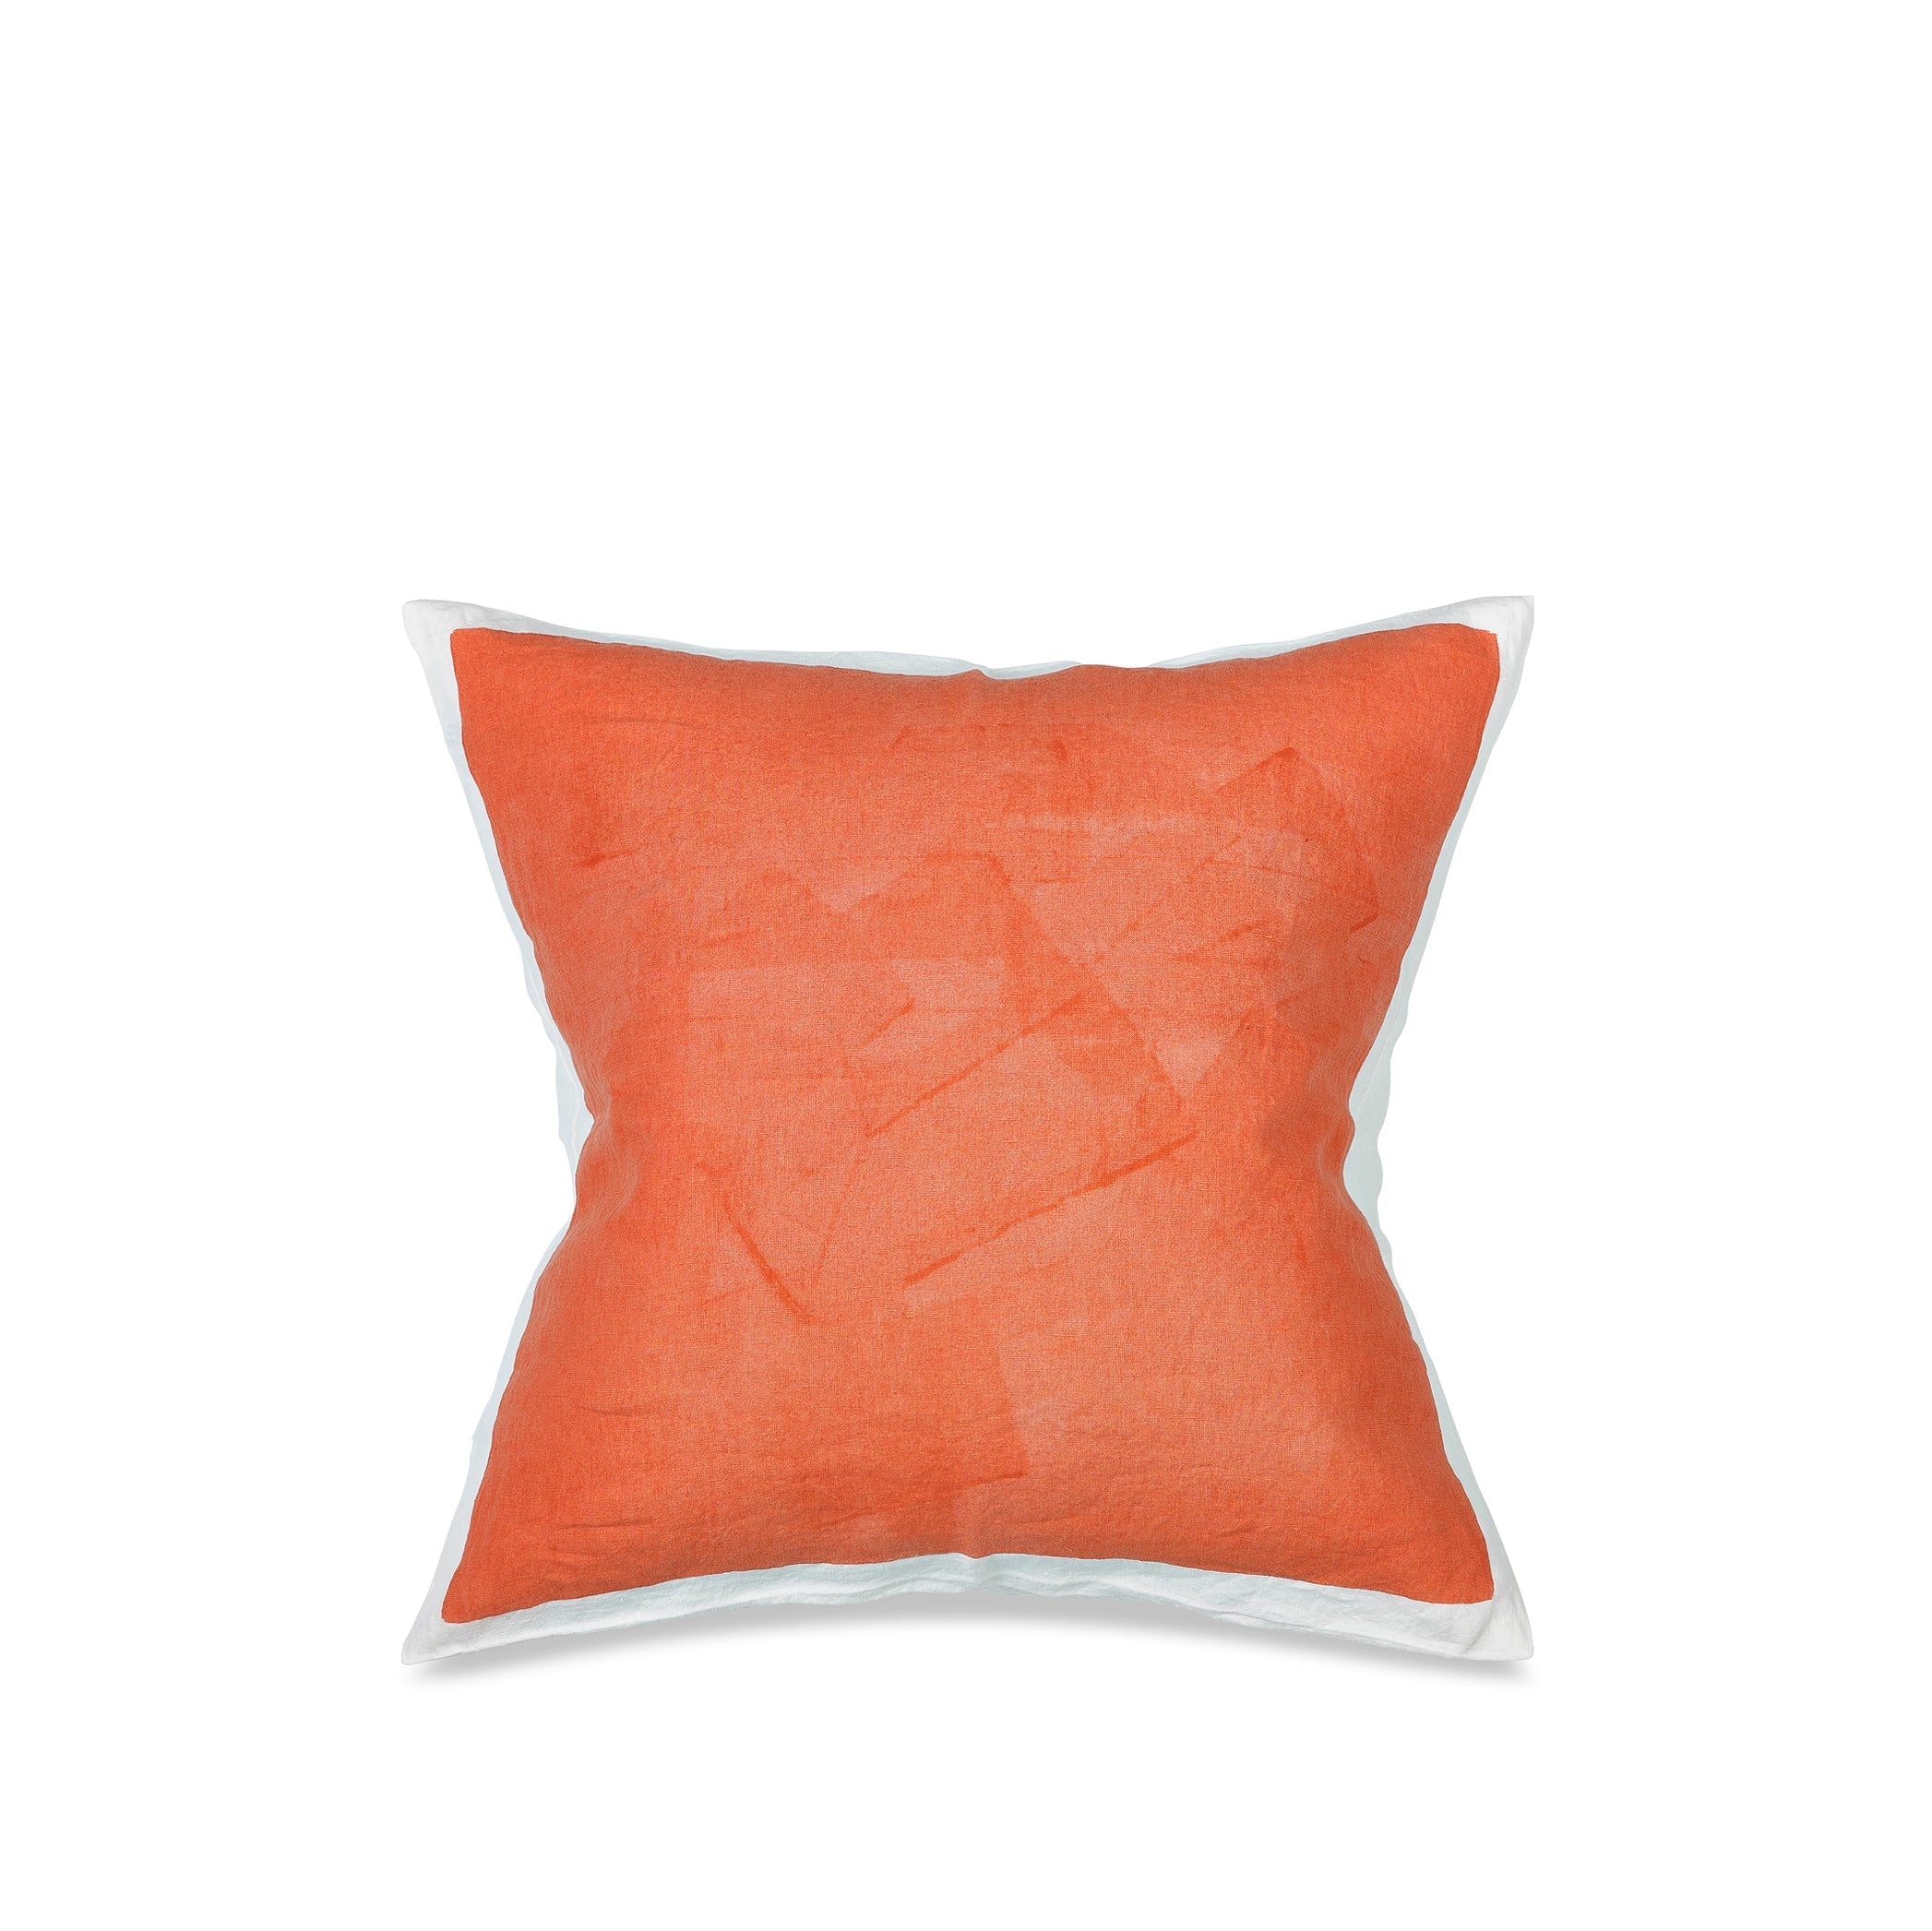 Hand Painted Linen Cushion in Coral, 60cm x 60cm